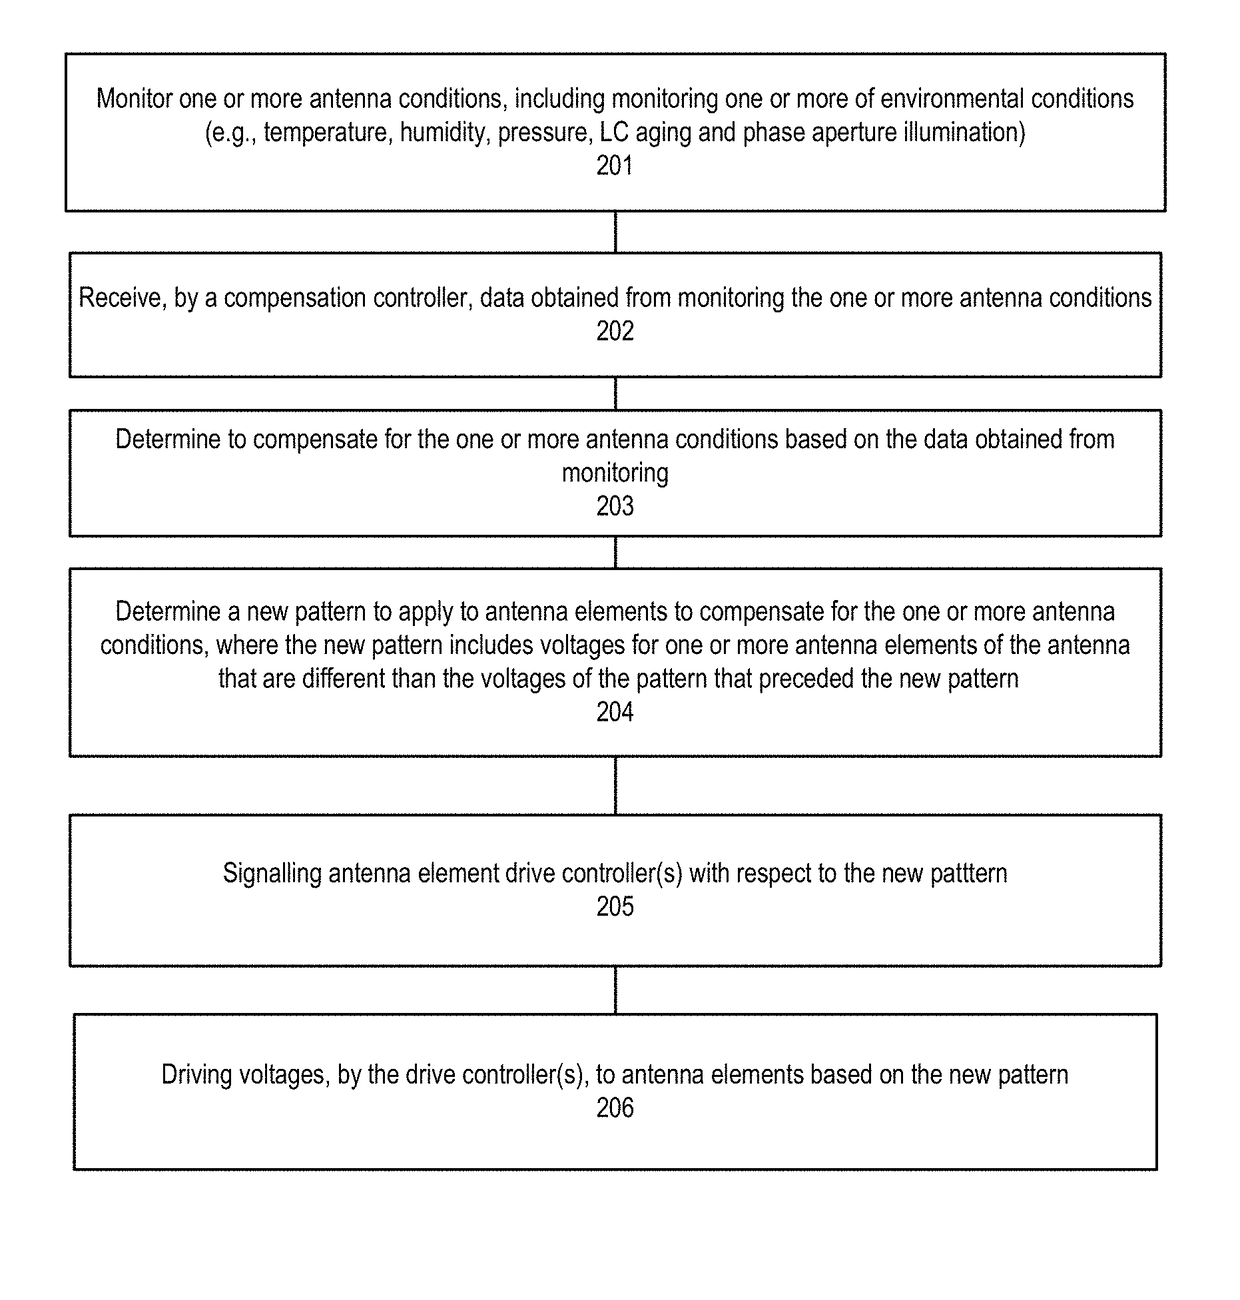 Method and apparatus for monitoring and compensating for environmental and other conditions affecting radio frequency liquid crystal